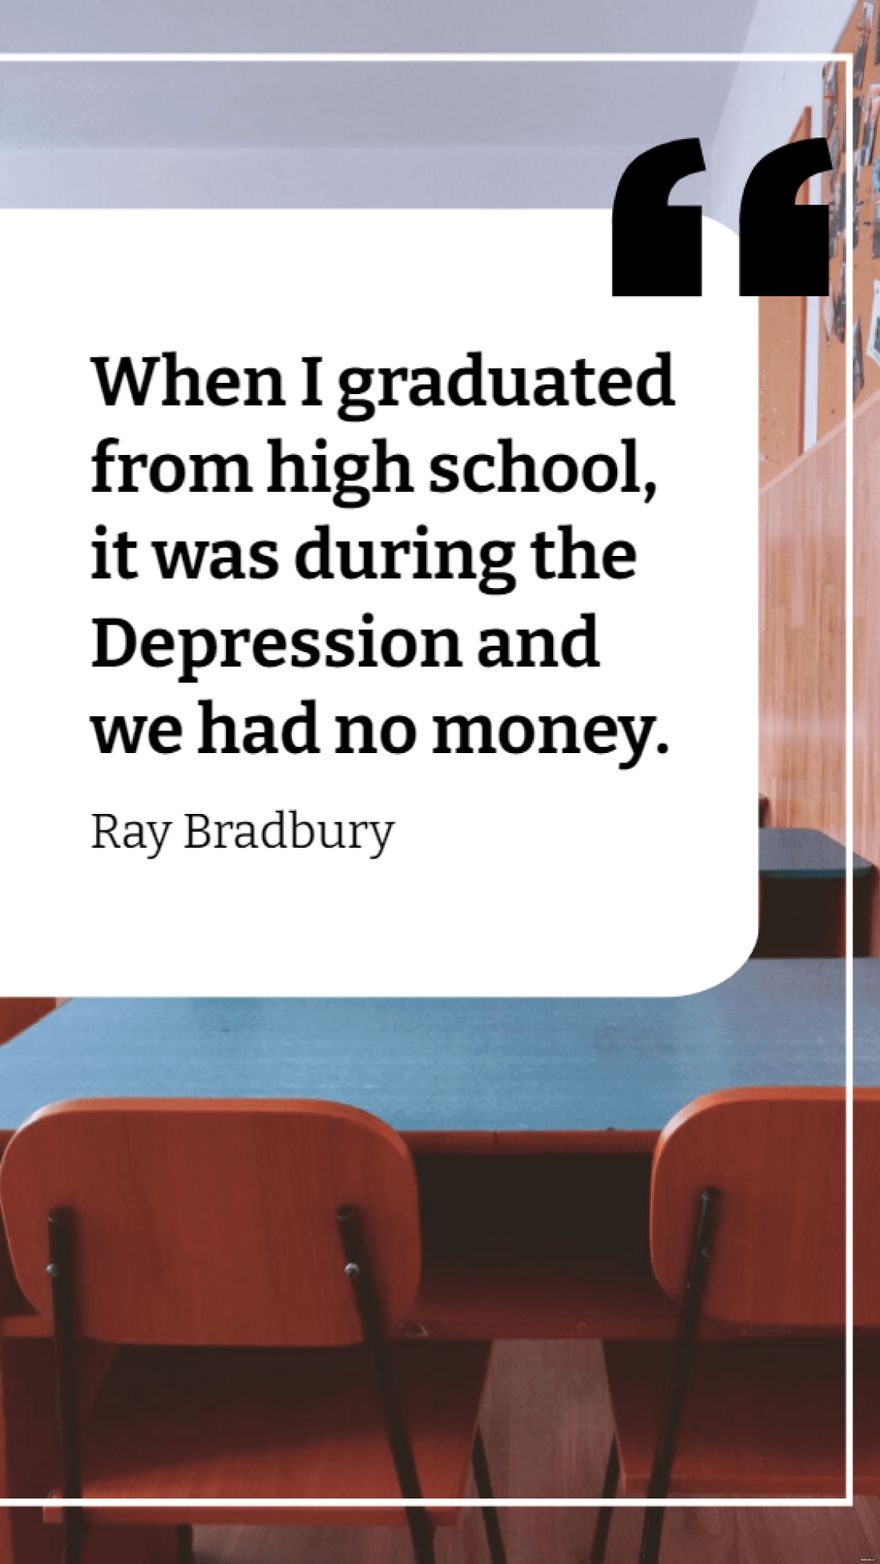 Ray Bradbury  When I graduated from high school it was during the Depression and we had no money